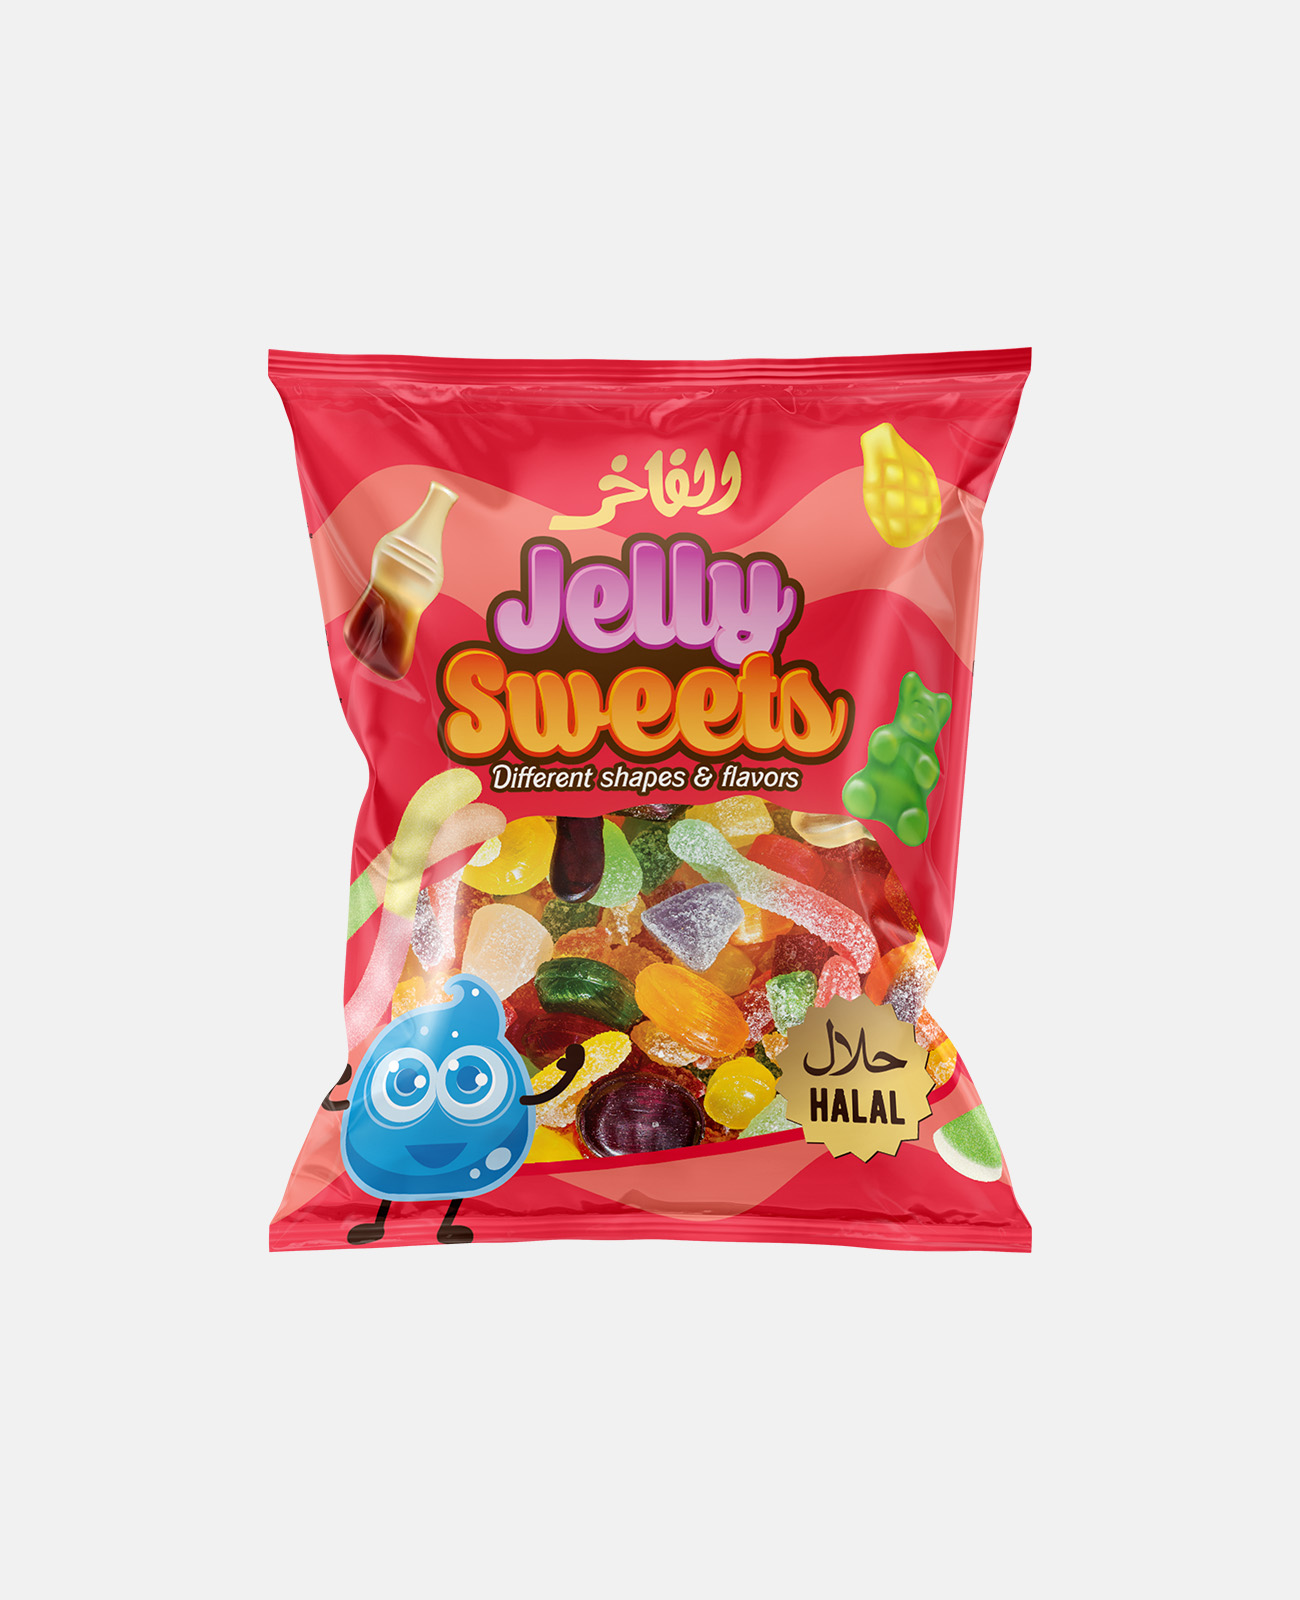 Alfakhr Jelly/Sugared Party Mix/Twist Mix